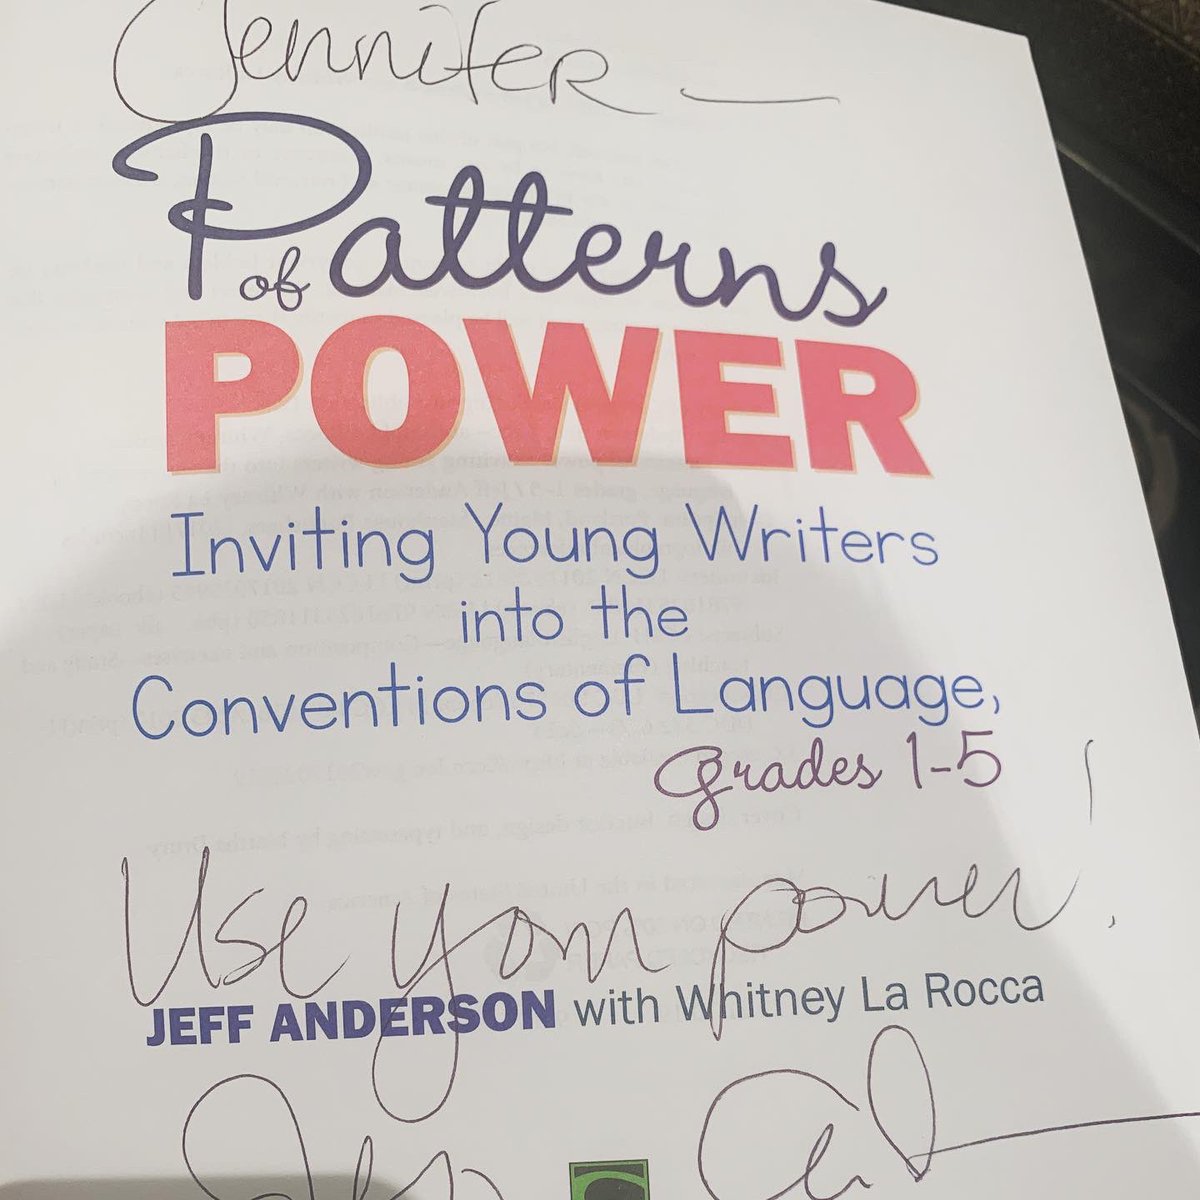 The writing teacher in me squealed a lot today! What did the writing teacher do? Squealed! Who squealed? The writing teacher! @writeguyjeff #patternsofpowerhumor #patternsofpower #writing #conventions #lovewriting #writingteacher #firstgradeteacher #iteachfirst